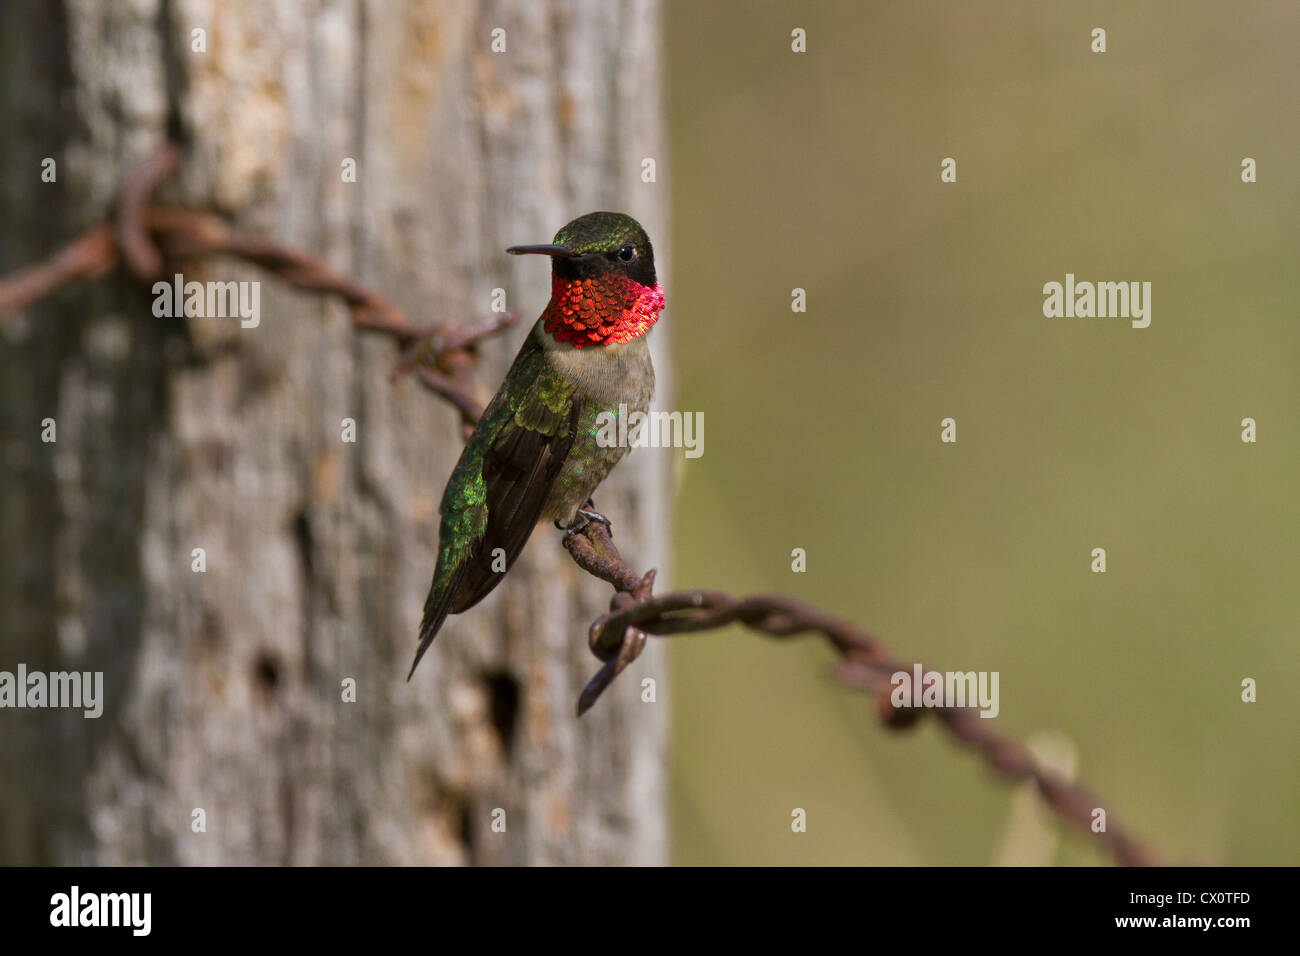 Homme Ruby-Throated Hummingbird Banque D'Images